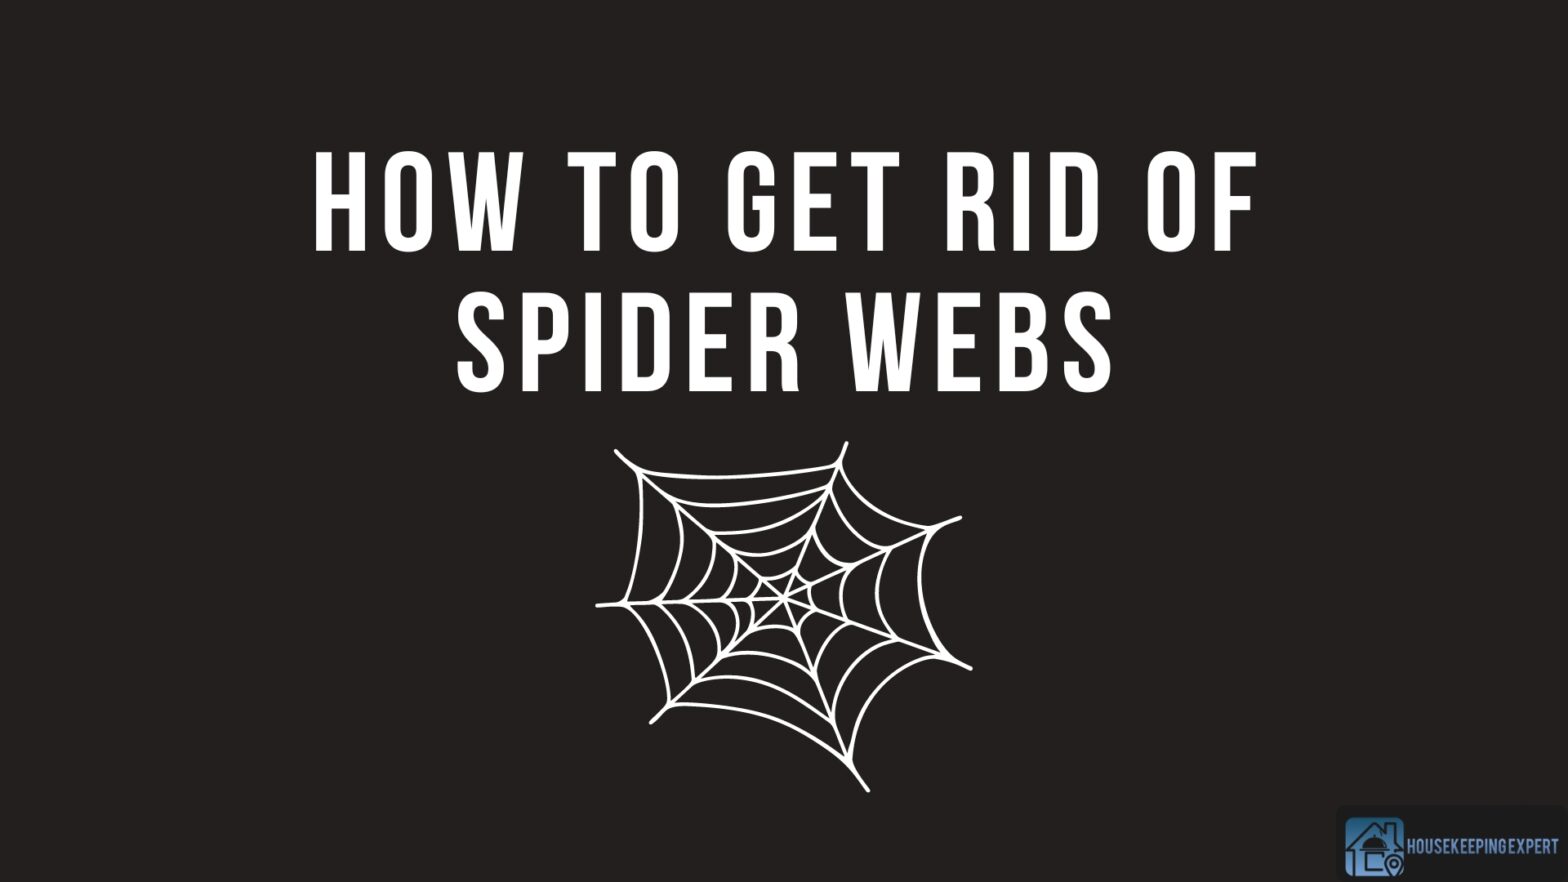 How To Get Rid Of Spider Webs